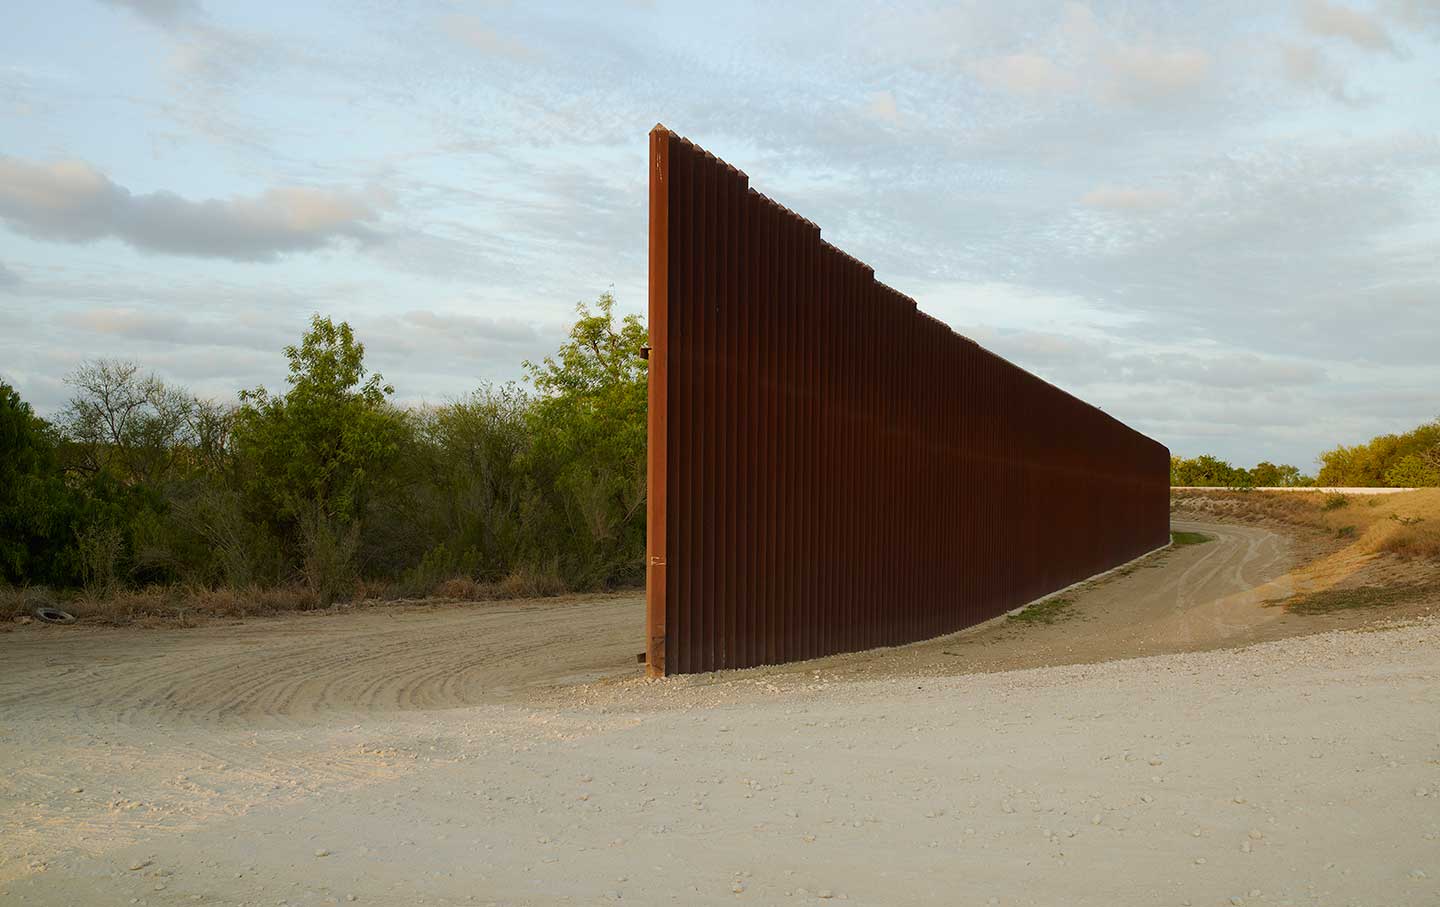 These Haunting Photos Show the Deadly Absurdity of the US-Mexico Border Wall